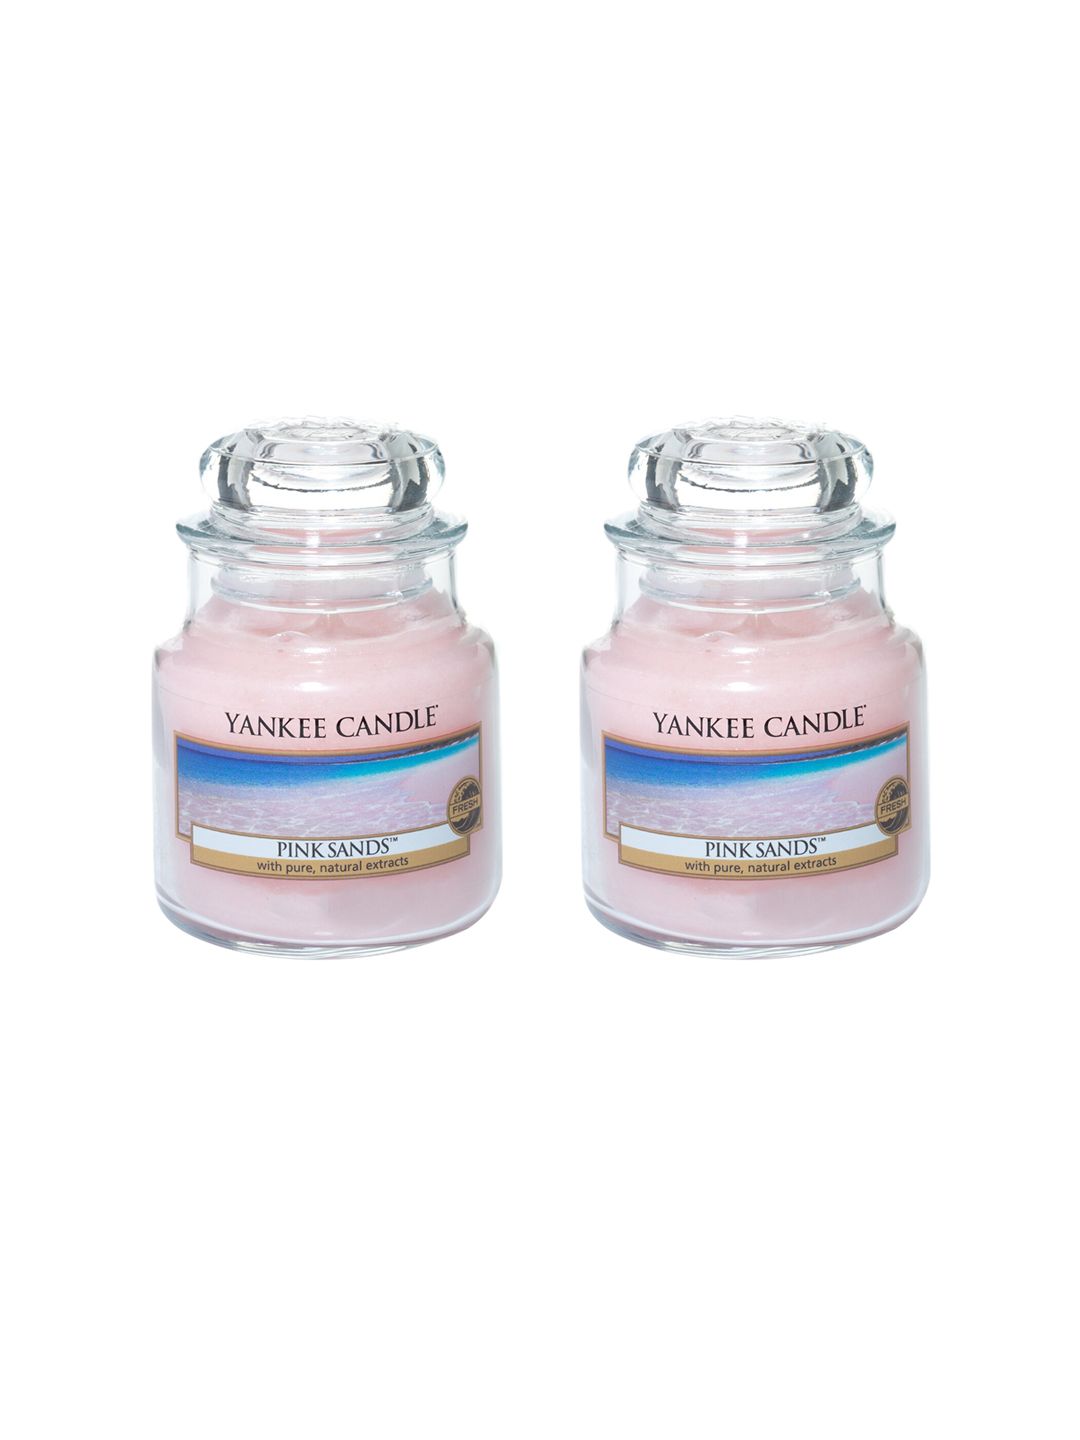 YANKEE CANDLE Set Of 2 Pink Sands Scented Jar Candles Price in India